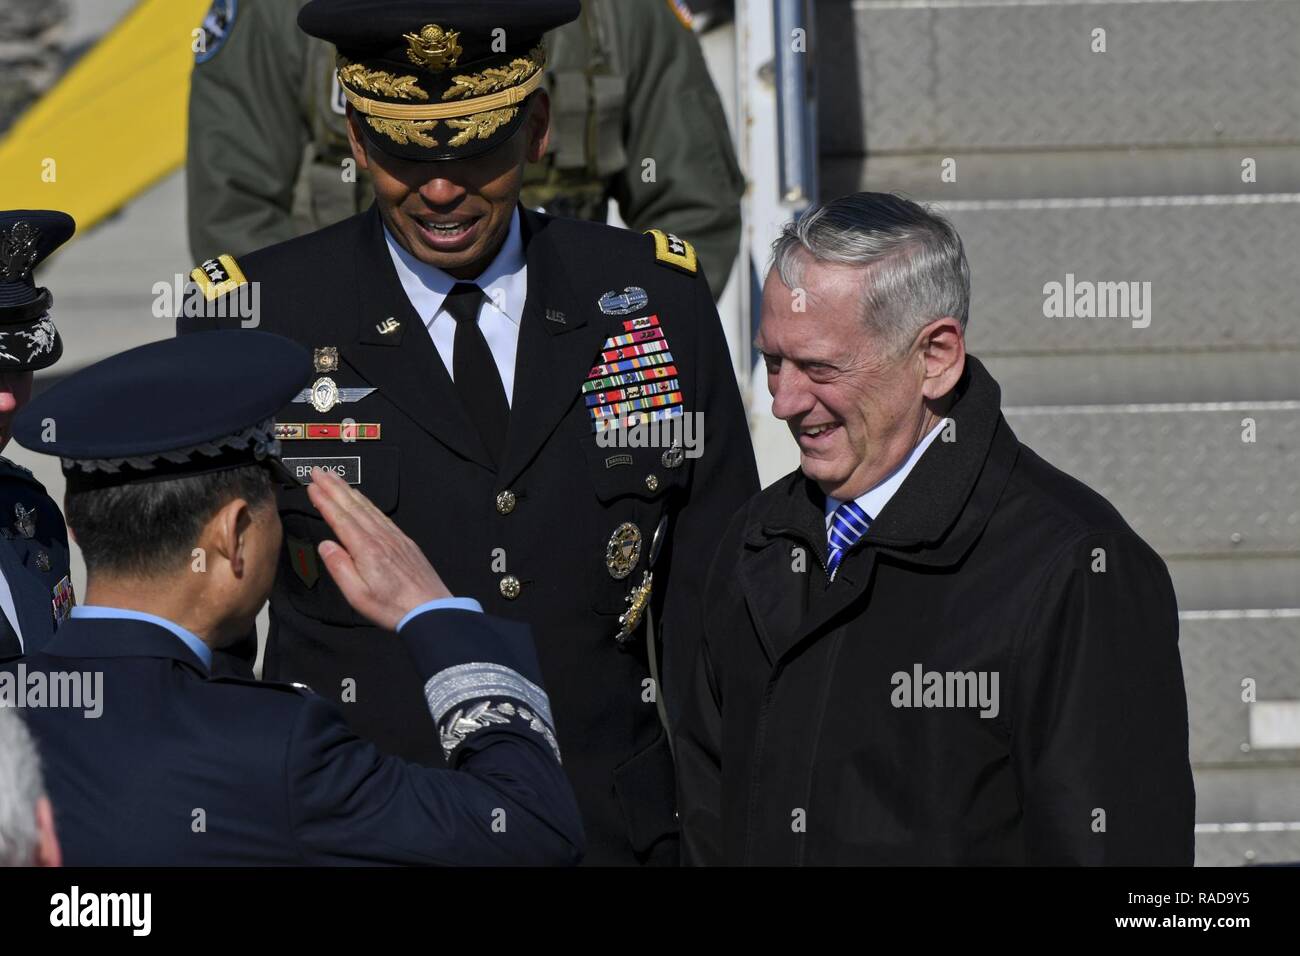 Defense Secretary Jim Mattis greets ROK air force Lt. Gen. Won, In-Choul, ROKAF Operations Command commander, as he arrives at Osan Air Base, Republic of Korea, Feb. 2, 2017. Mattis’ visit to the ROK, the first such visit in his tenure as secretary of defense, comes in light of a year of strong provocations from North Korea, affirming the ironclad commitment the U.S. has in strengthening its robust alliance with the ROK. Stock Photo